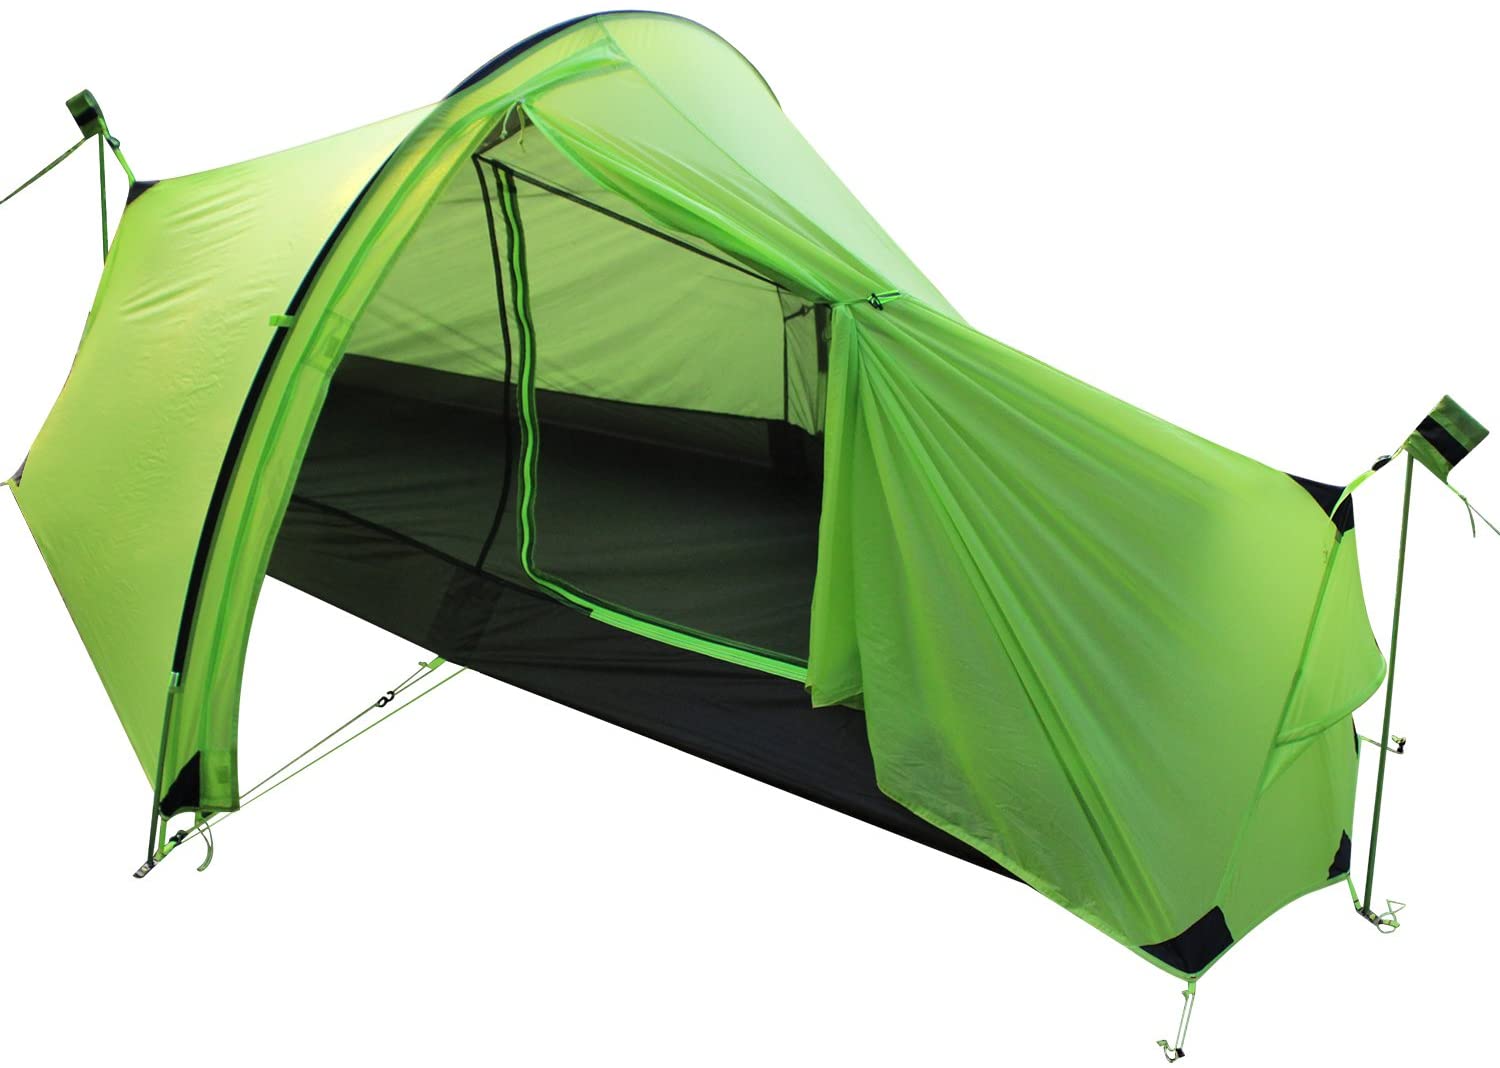 Ultralight Tent, Waterproof 1 Person Camping Tent